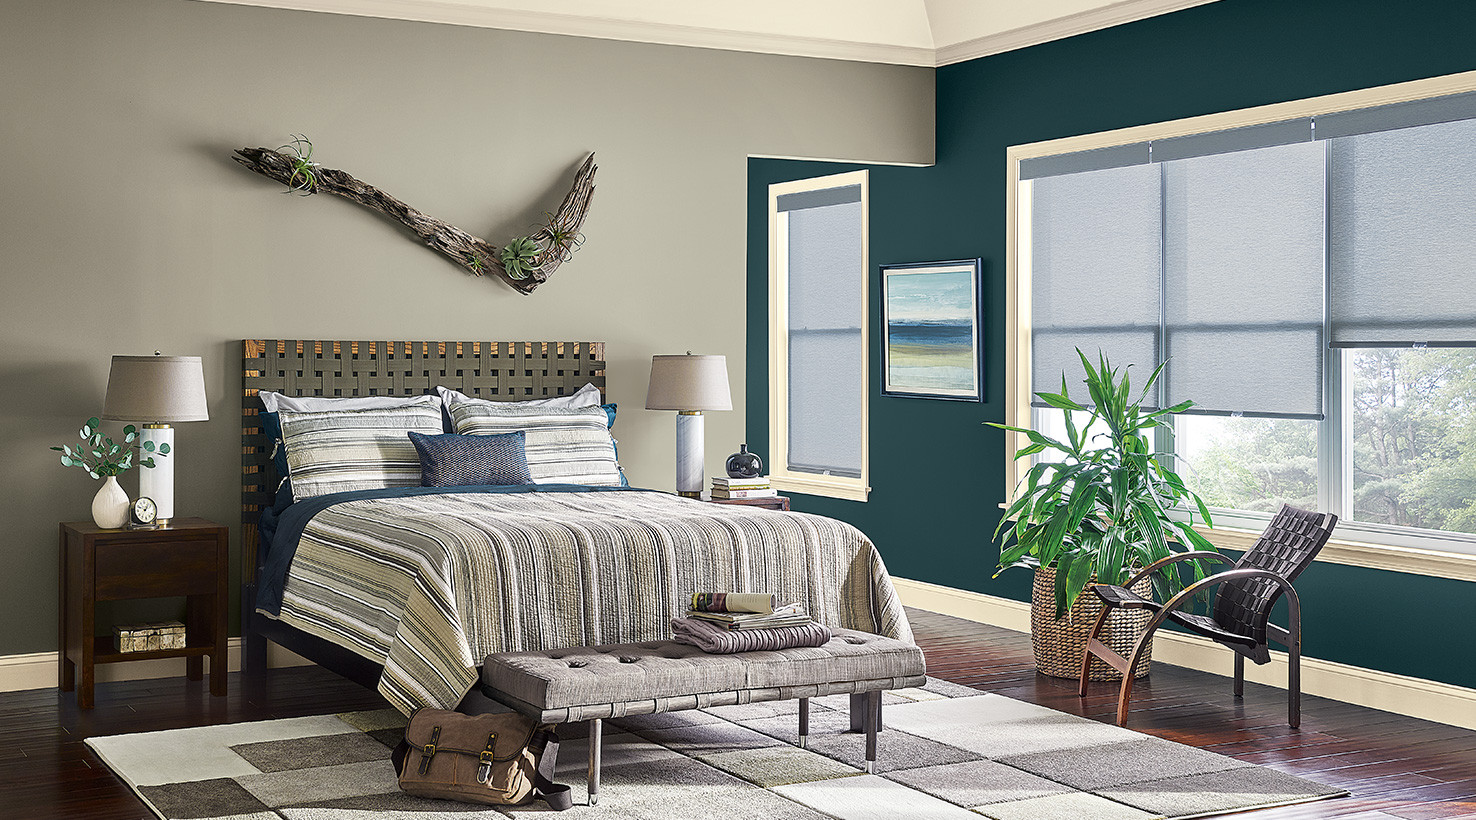 Sherwin Williams Bedroom Paint Colors
 Bedroom Paint Color Ideas Inspiration Gallery